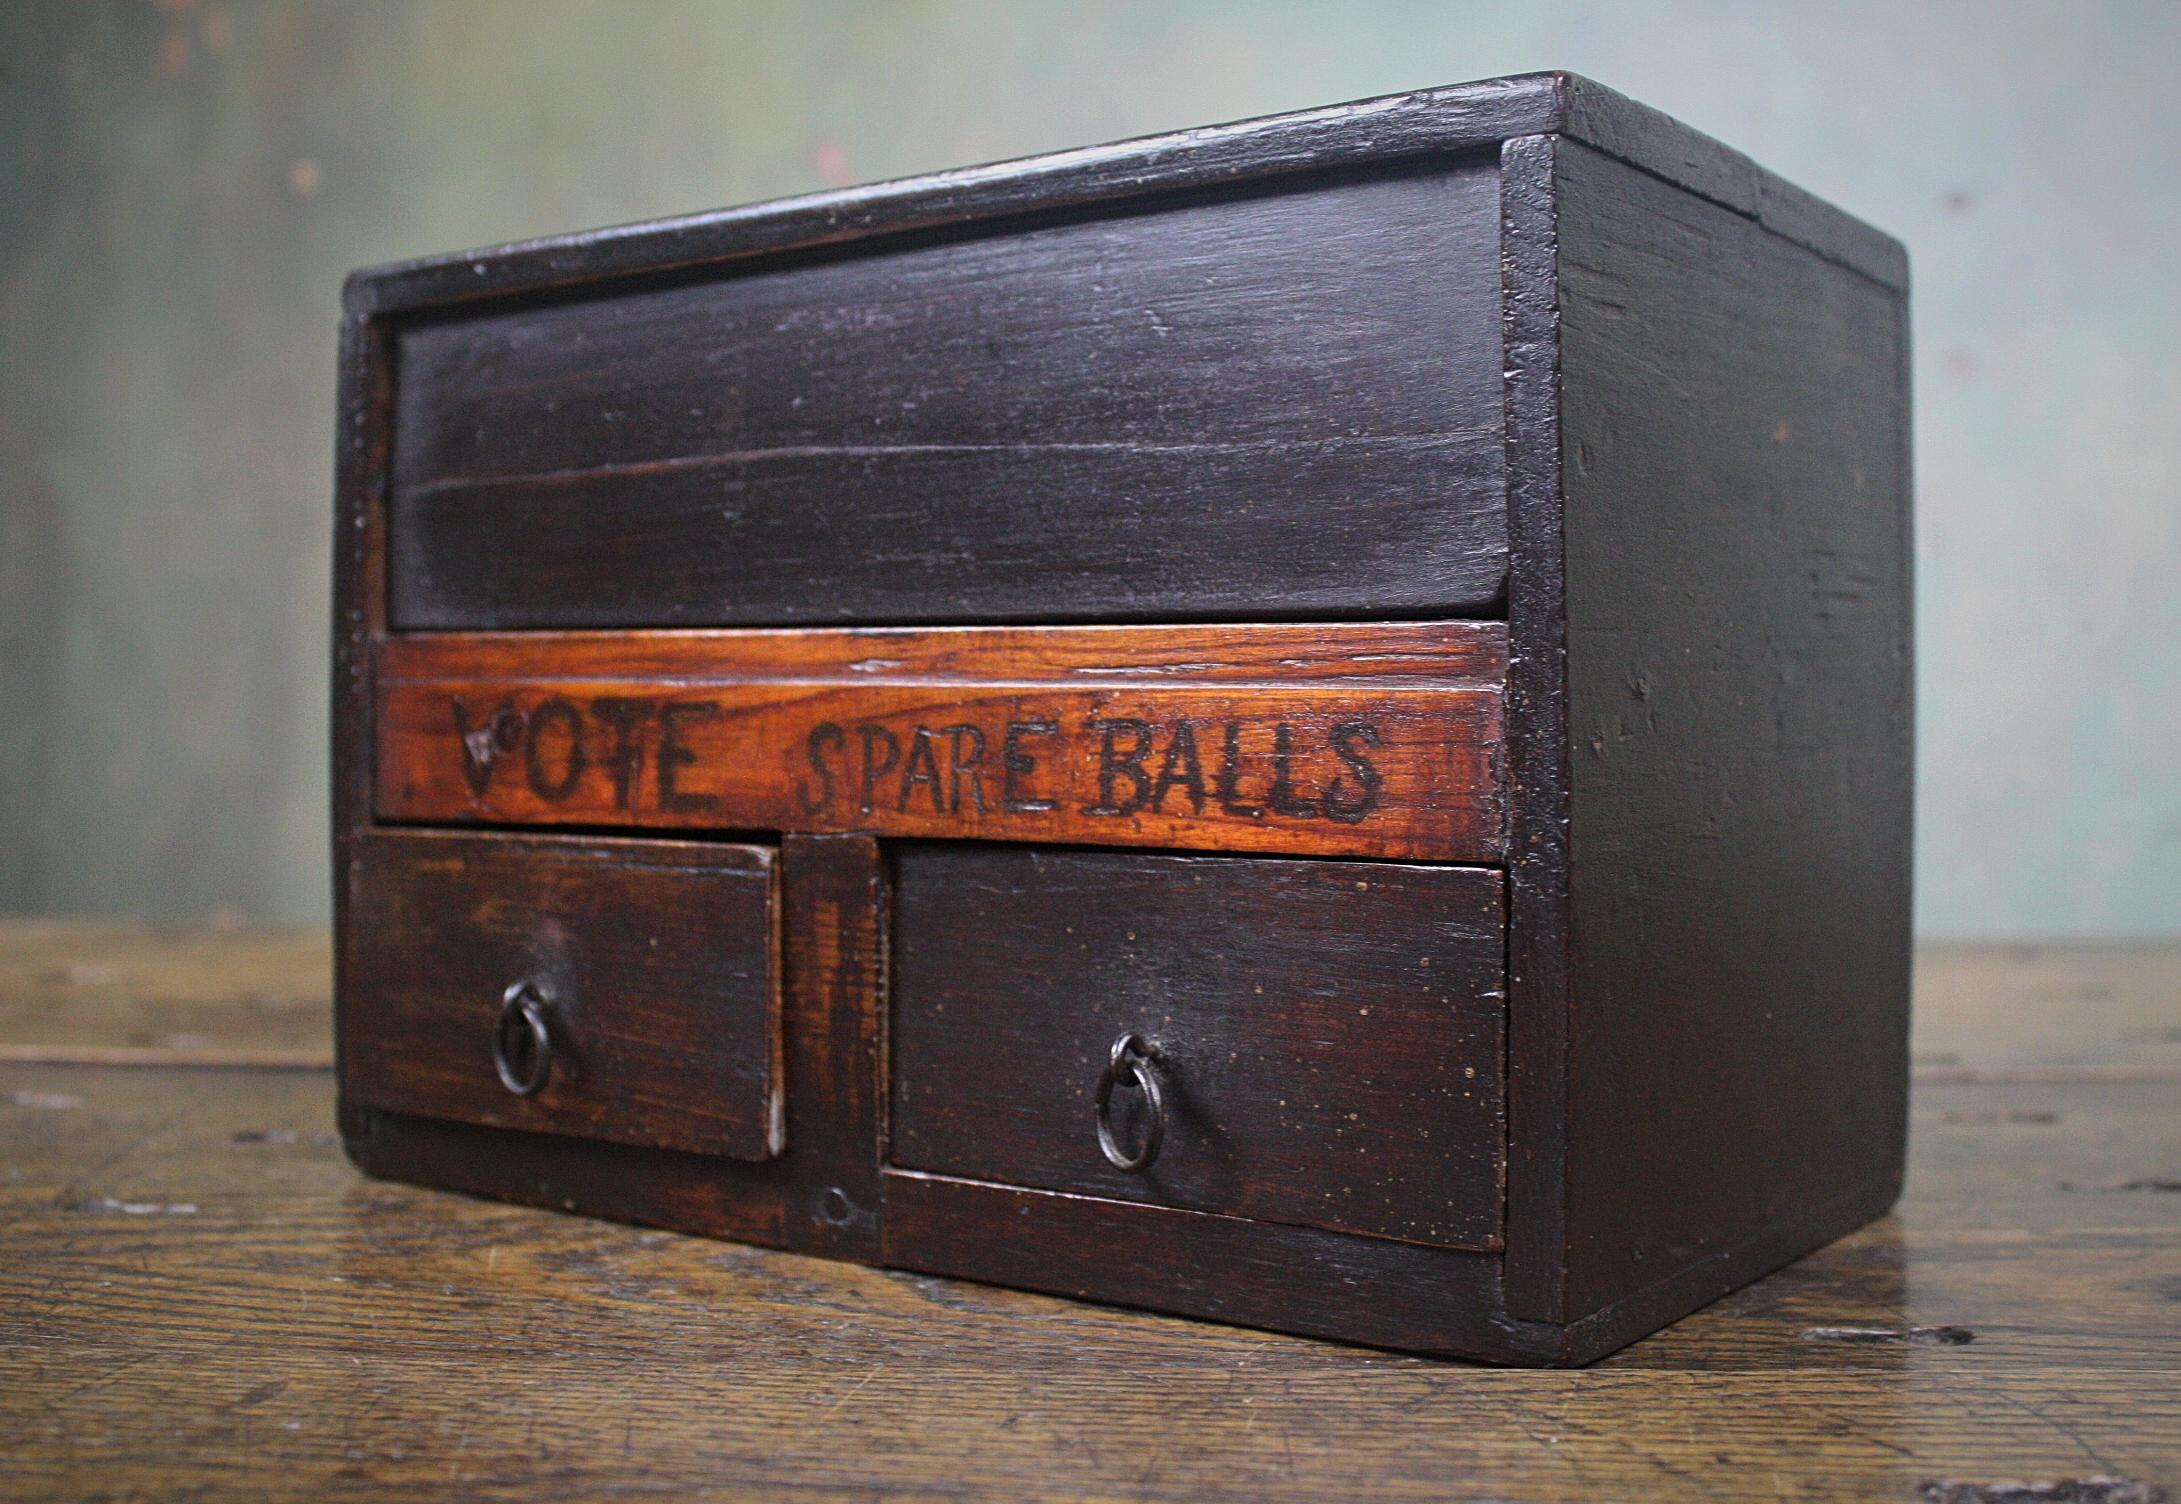 An unusual ballot box late 19th century in age with scraffito lettering 